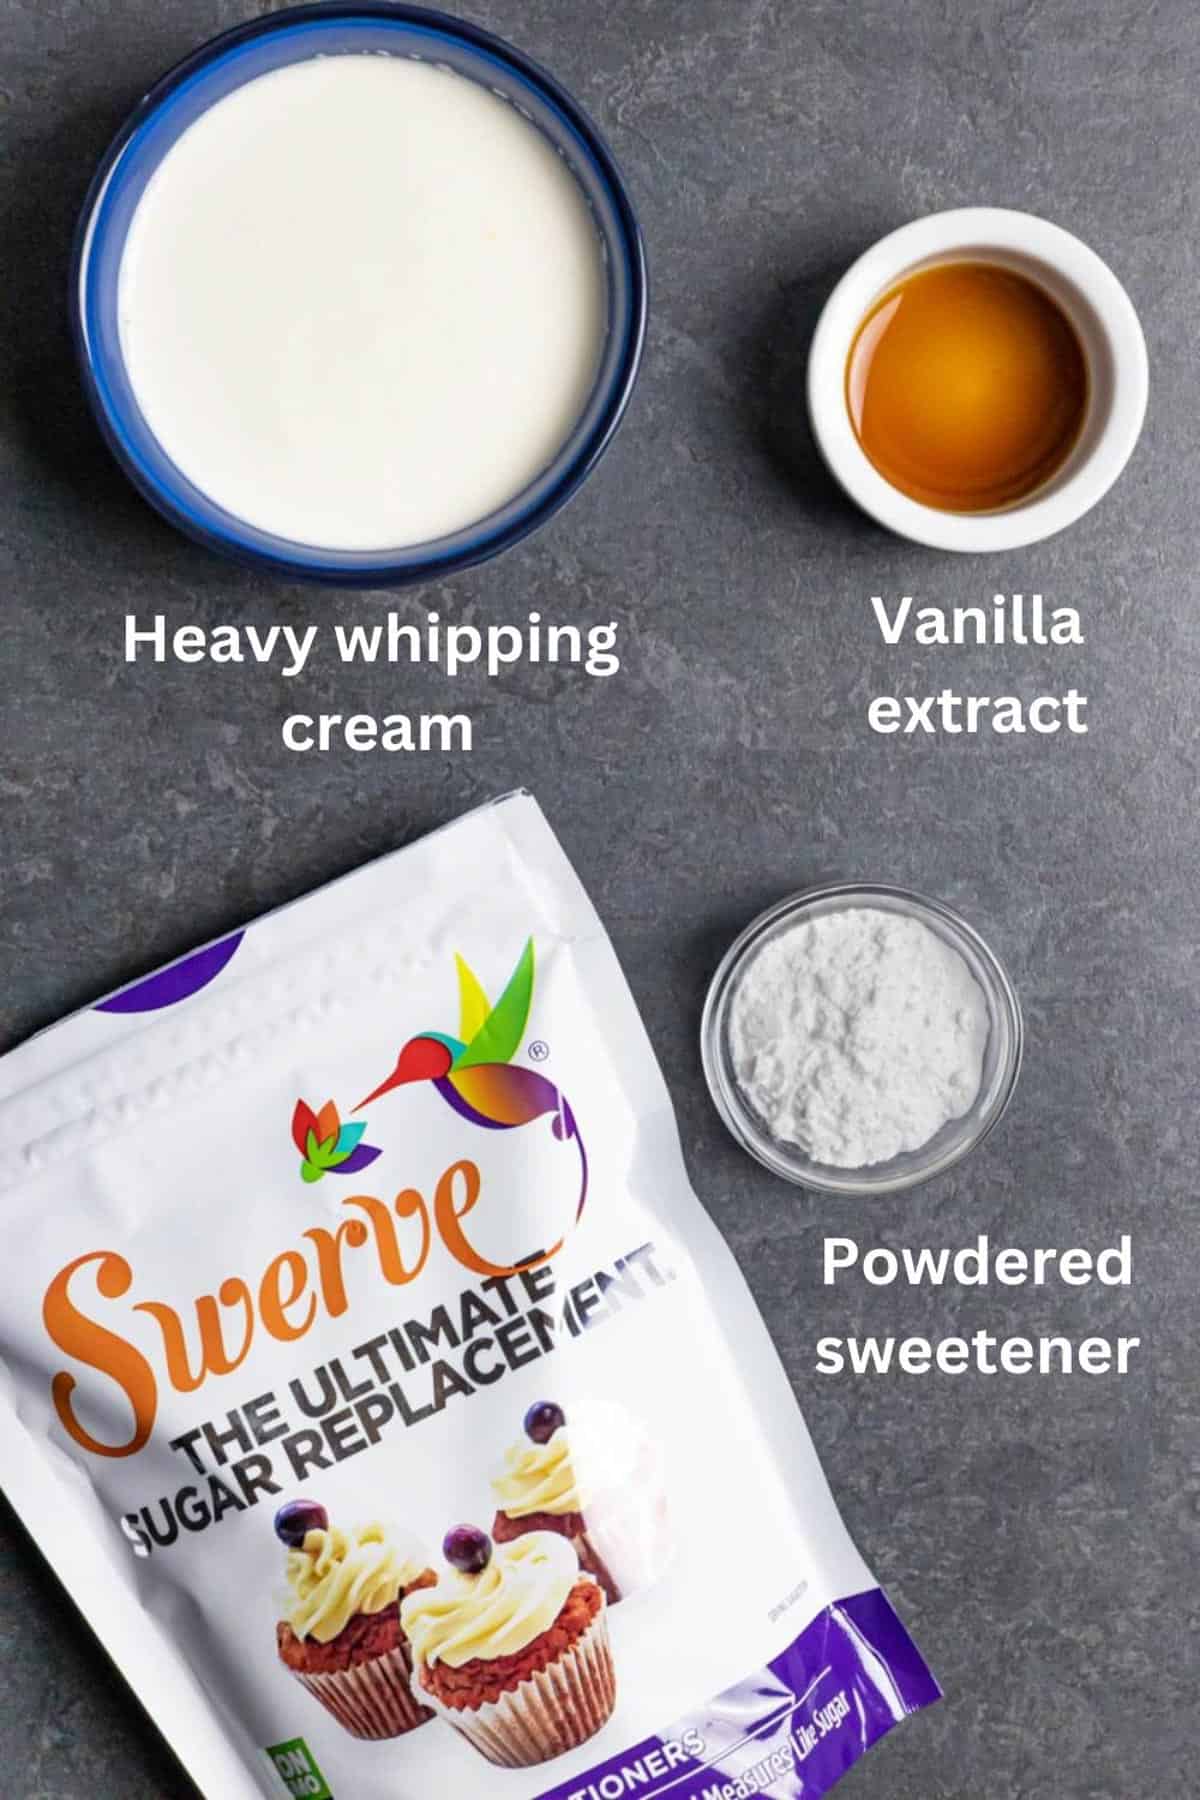 Small labeled bowls of sugar-free whipped cream ingredients and a bag of Swerve sweetener.